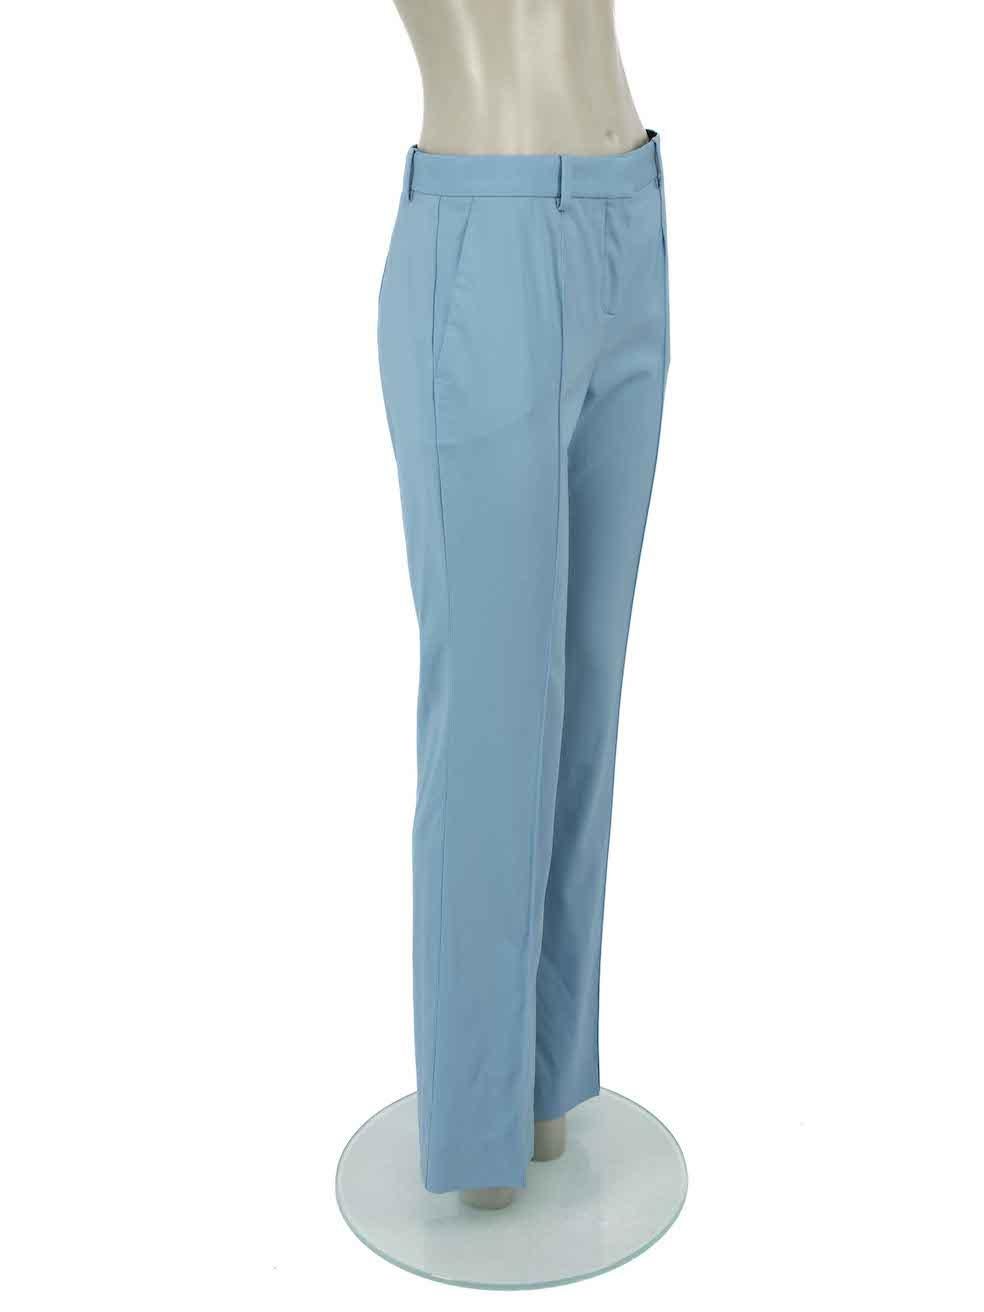 CONDITION is Very good. Hardly any visible wear to trousers is evident on this used Versace designer resale item.
 
Details
Cornflower blue
Wool
Straight leg trousers
Low rise
Front zip closure with button and clasp
Belt hoops
2x Front side